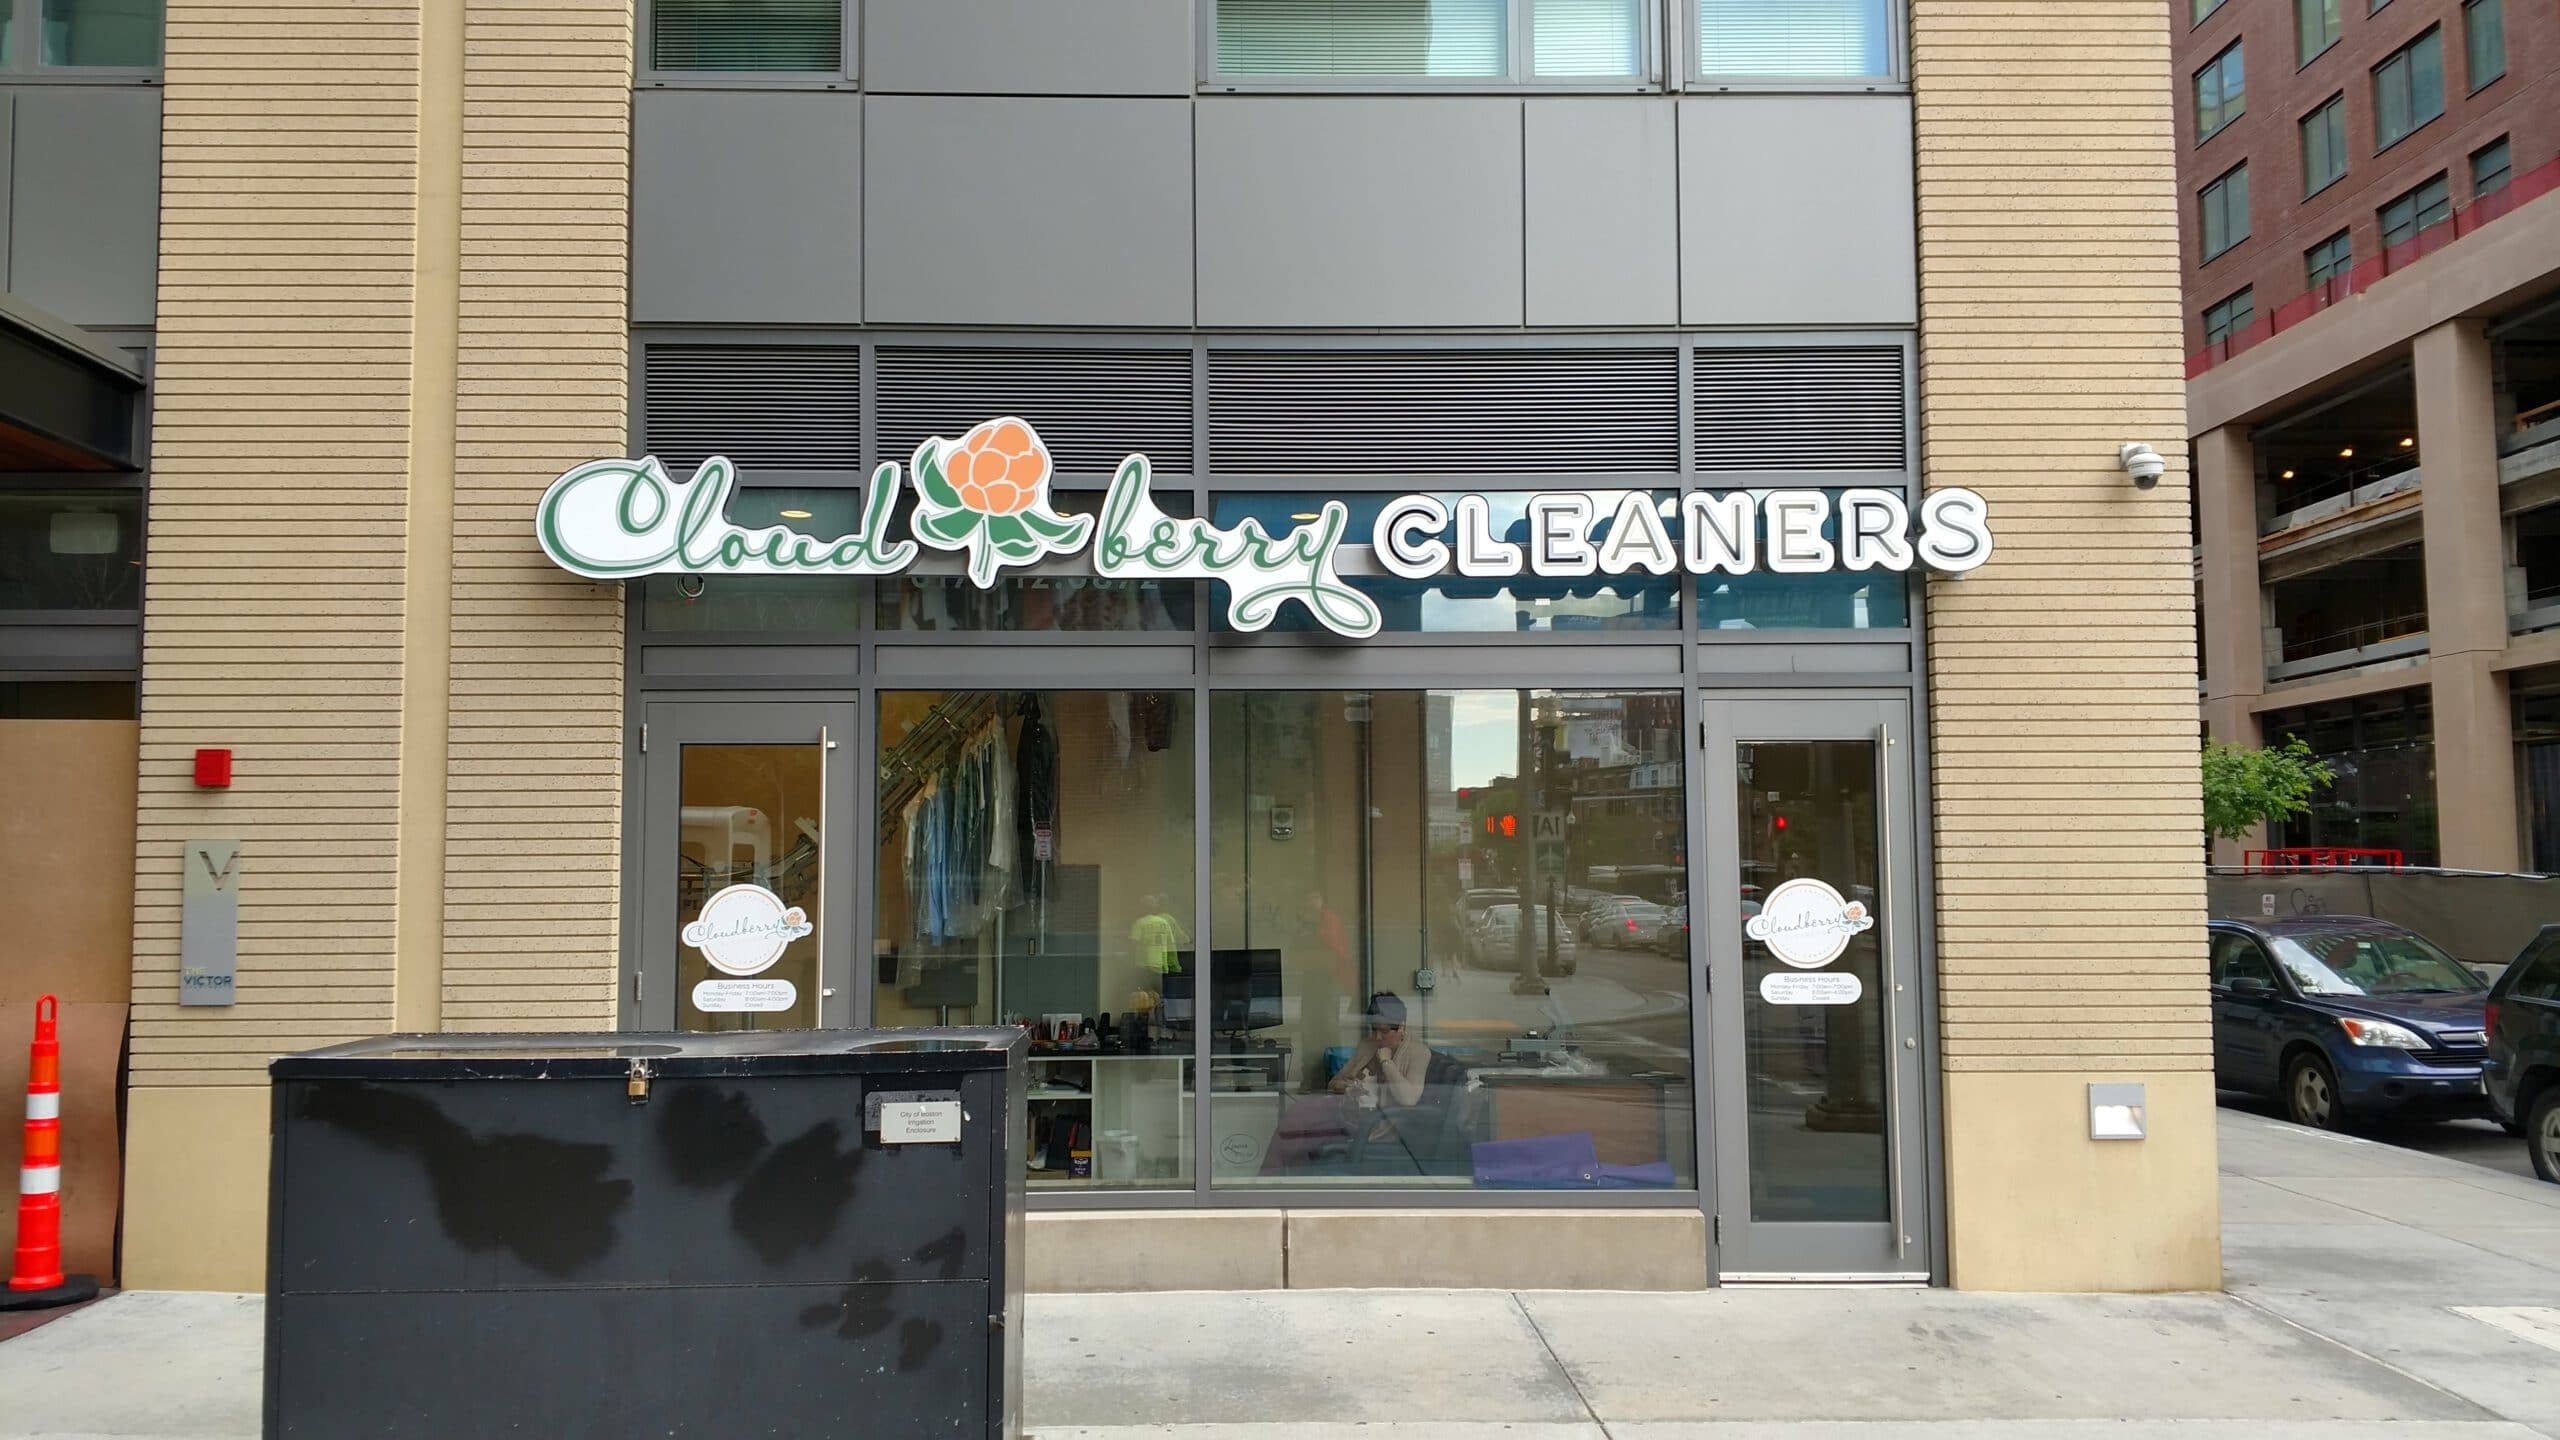 Cloudberry Cleaners Channel Letter Sign